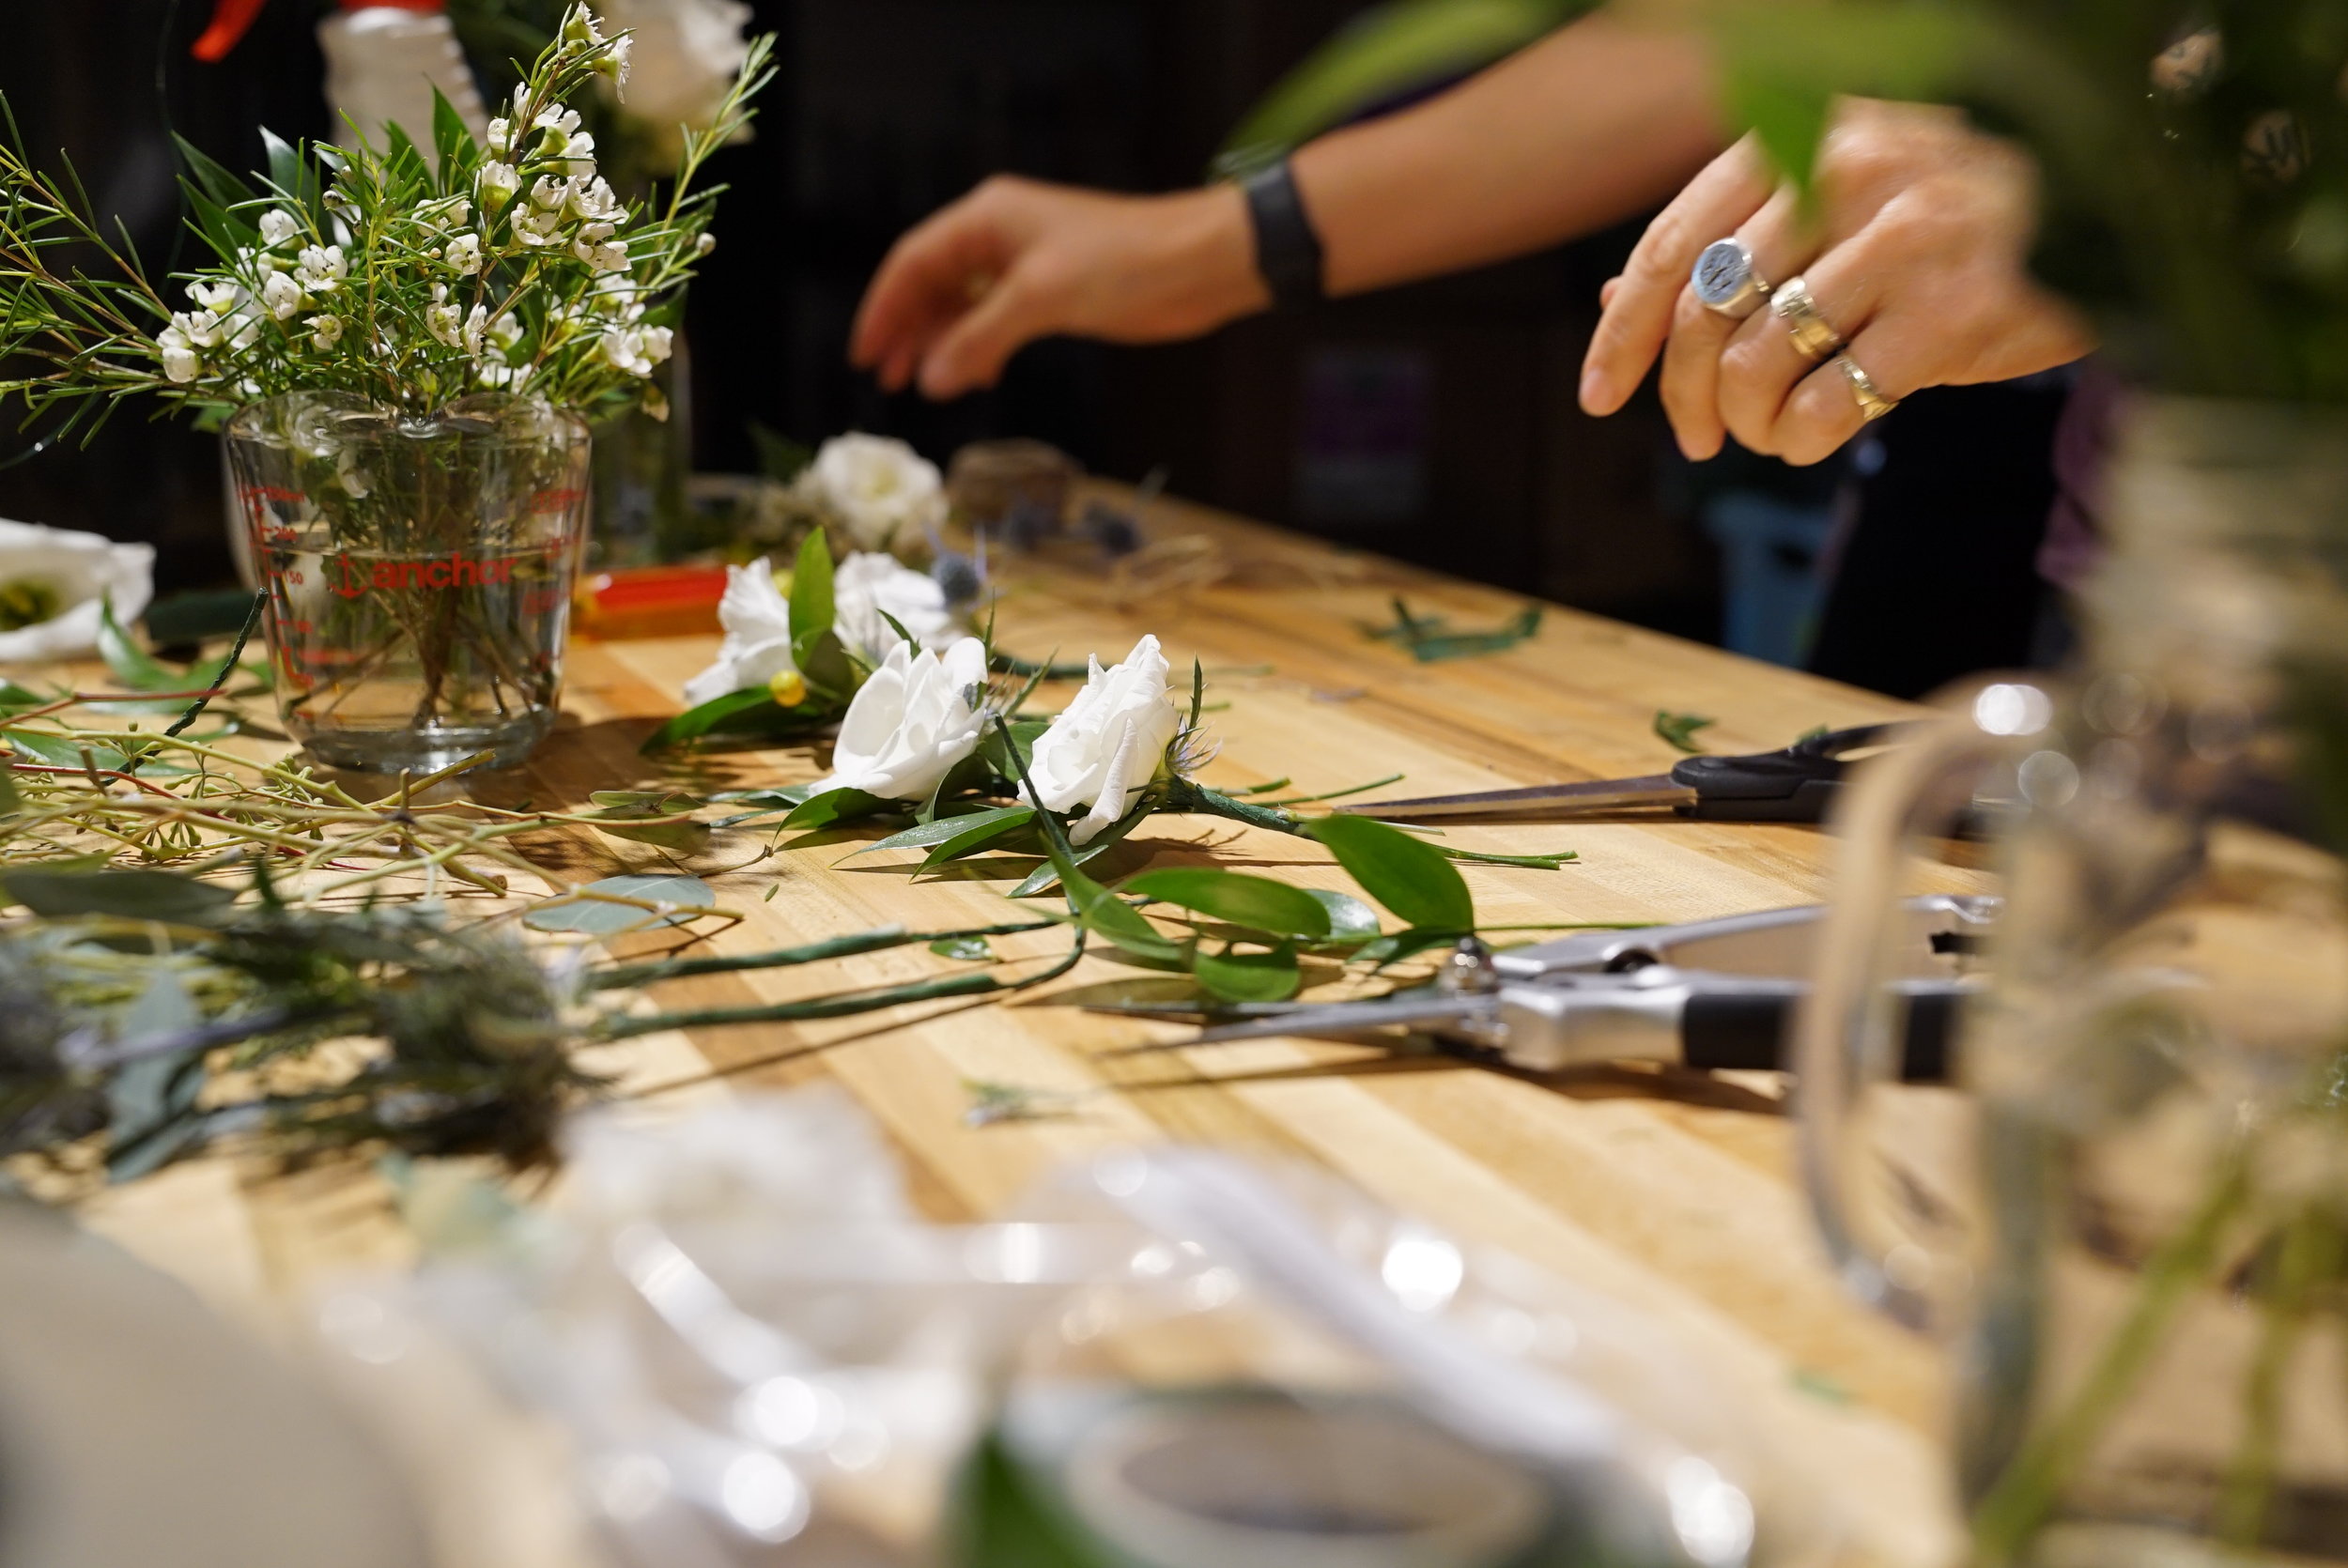  Boutonnieres are one of the last things to be assembled, as they will not have access to water once they're made. Lisianthus, while incredibly delicate looking, are actually a great choice for a long lasting boutonniere.&nbsp; 